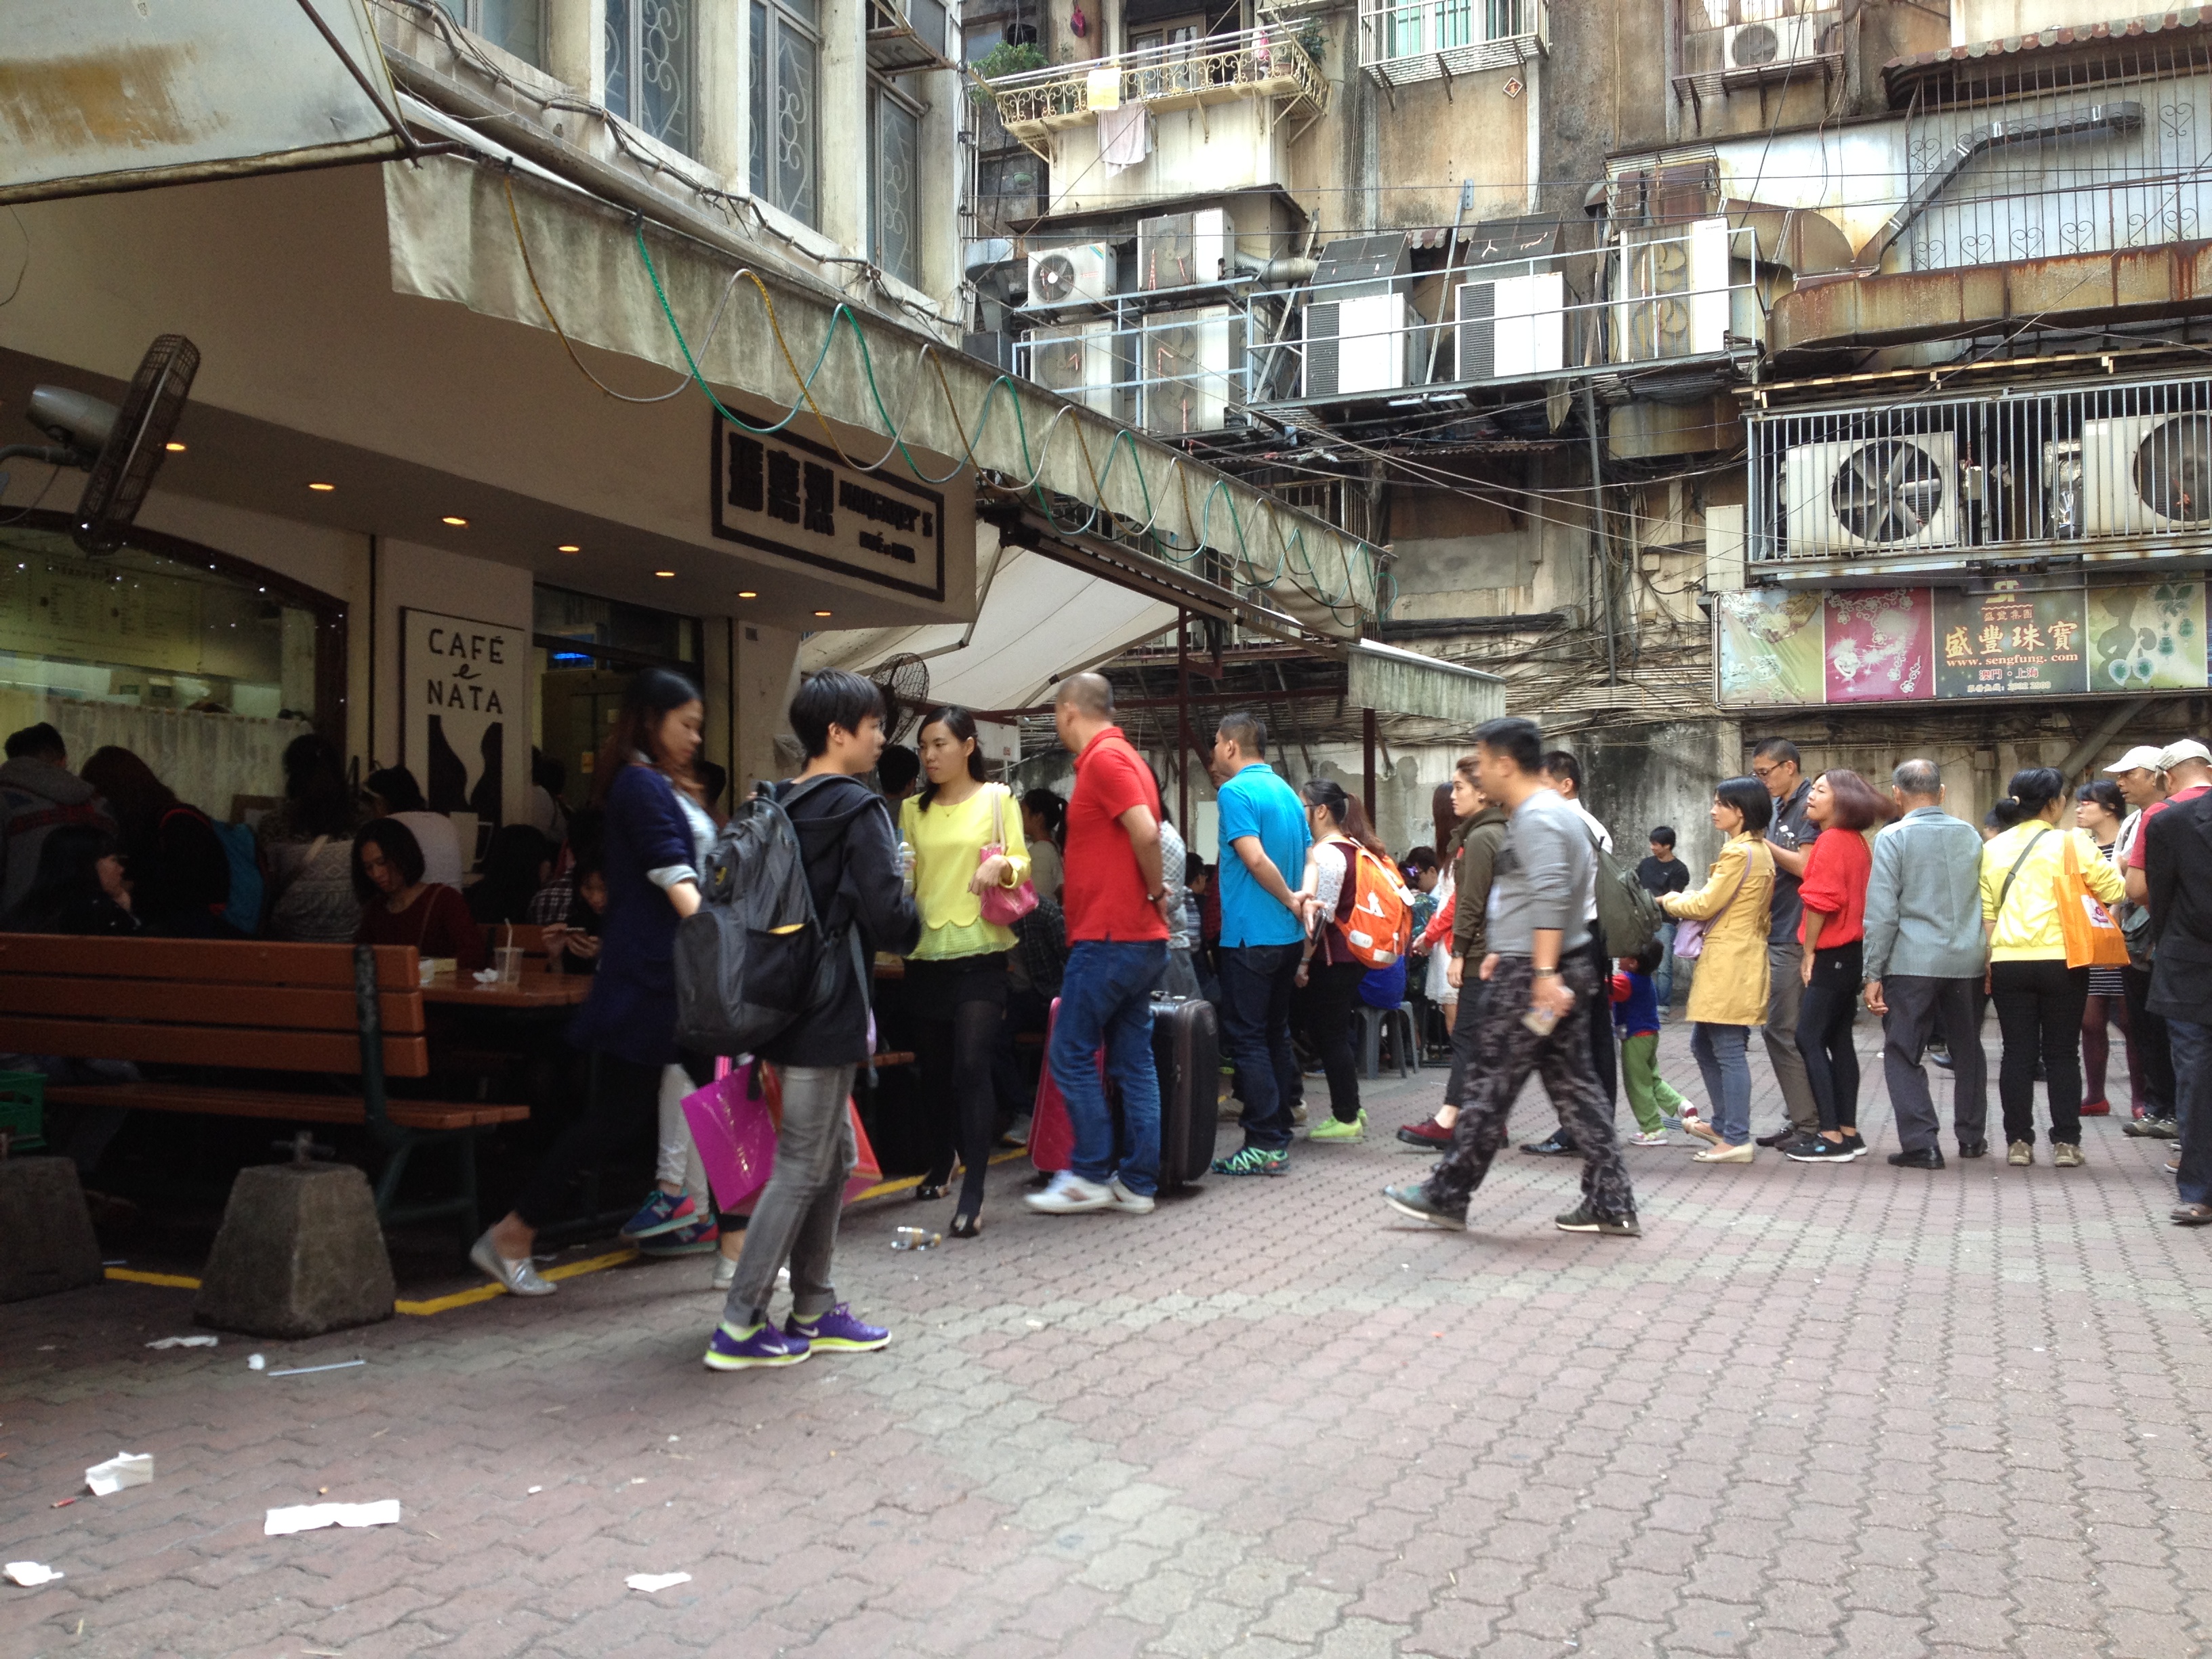 Outside Margeret's cafe in Macau